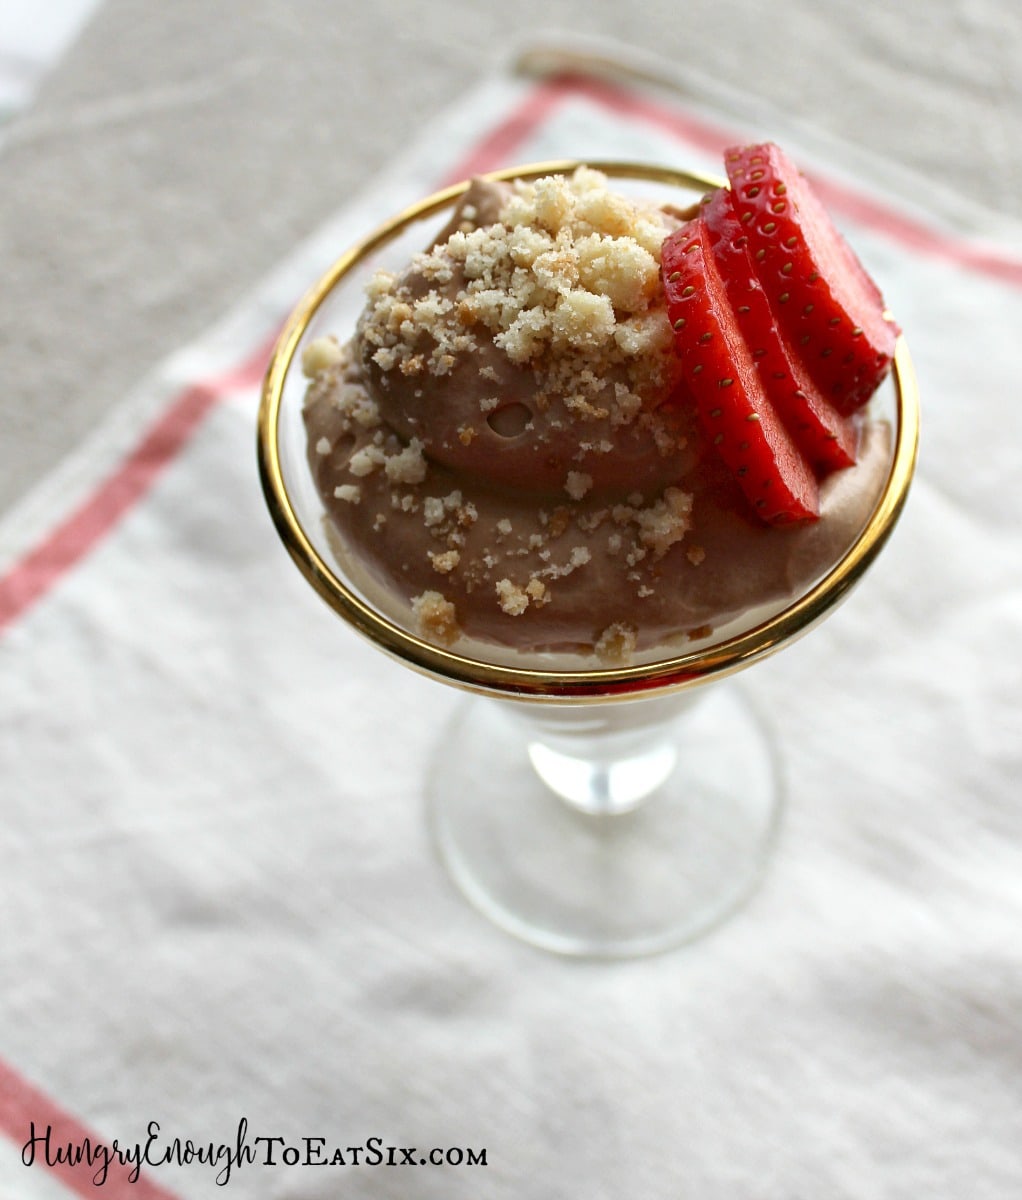 A rich, chocolate mousse that comes together quickly, and is an incredibly delicious dessert!